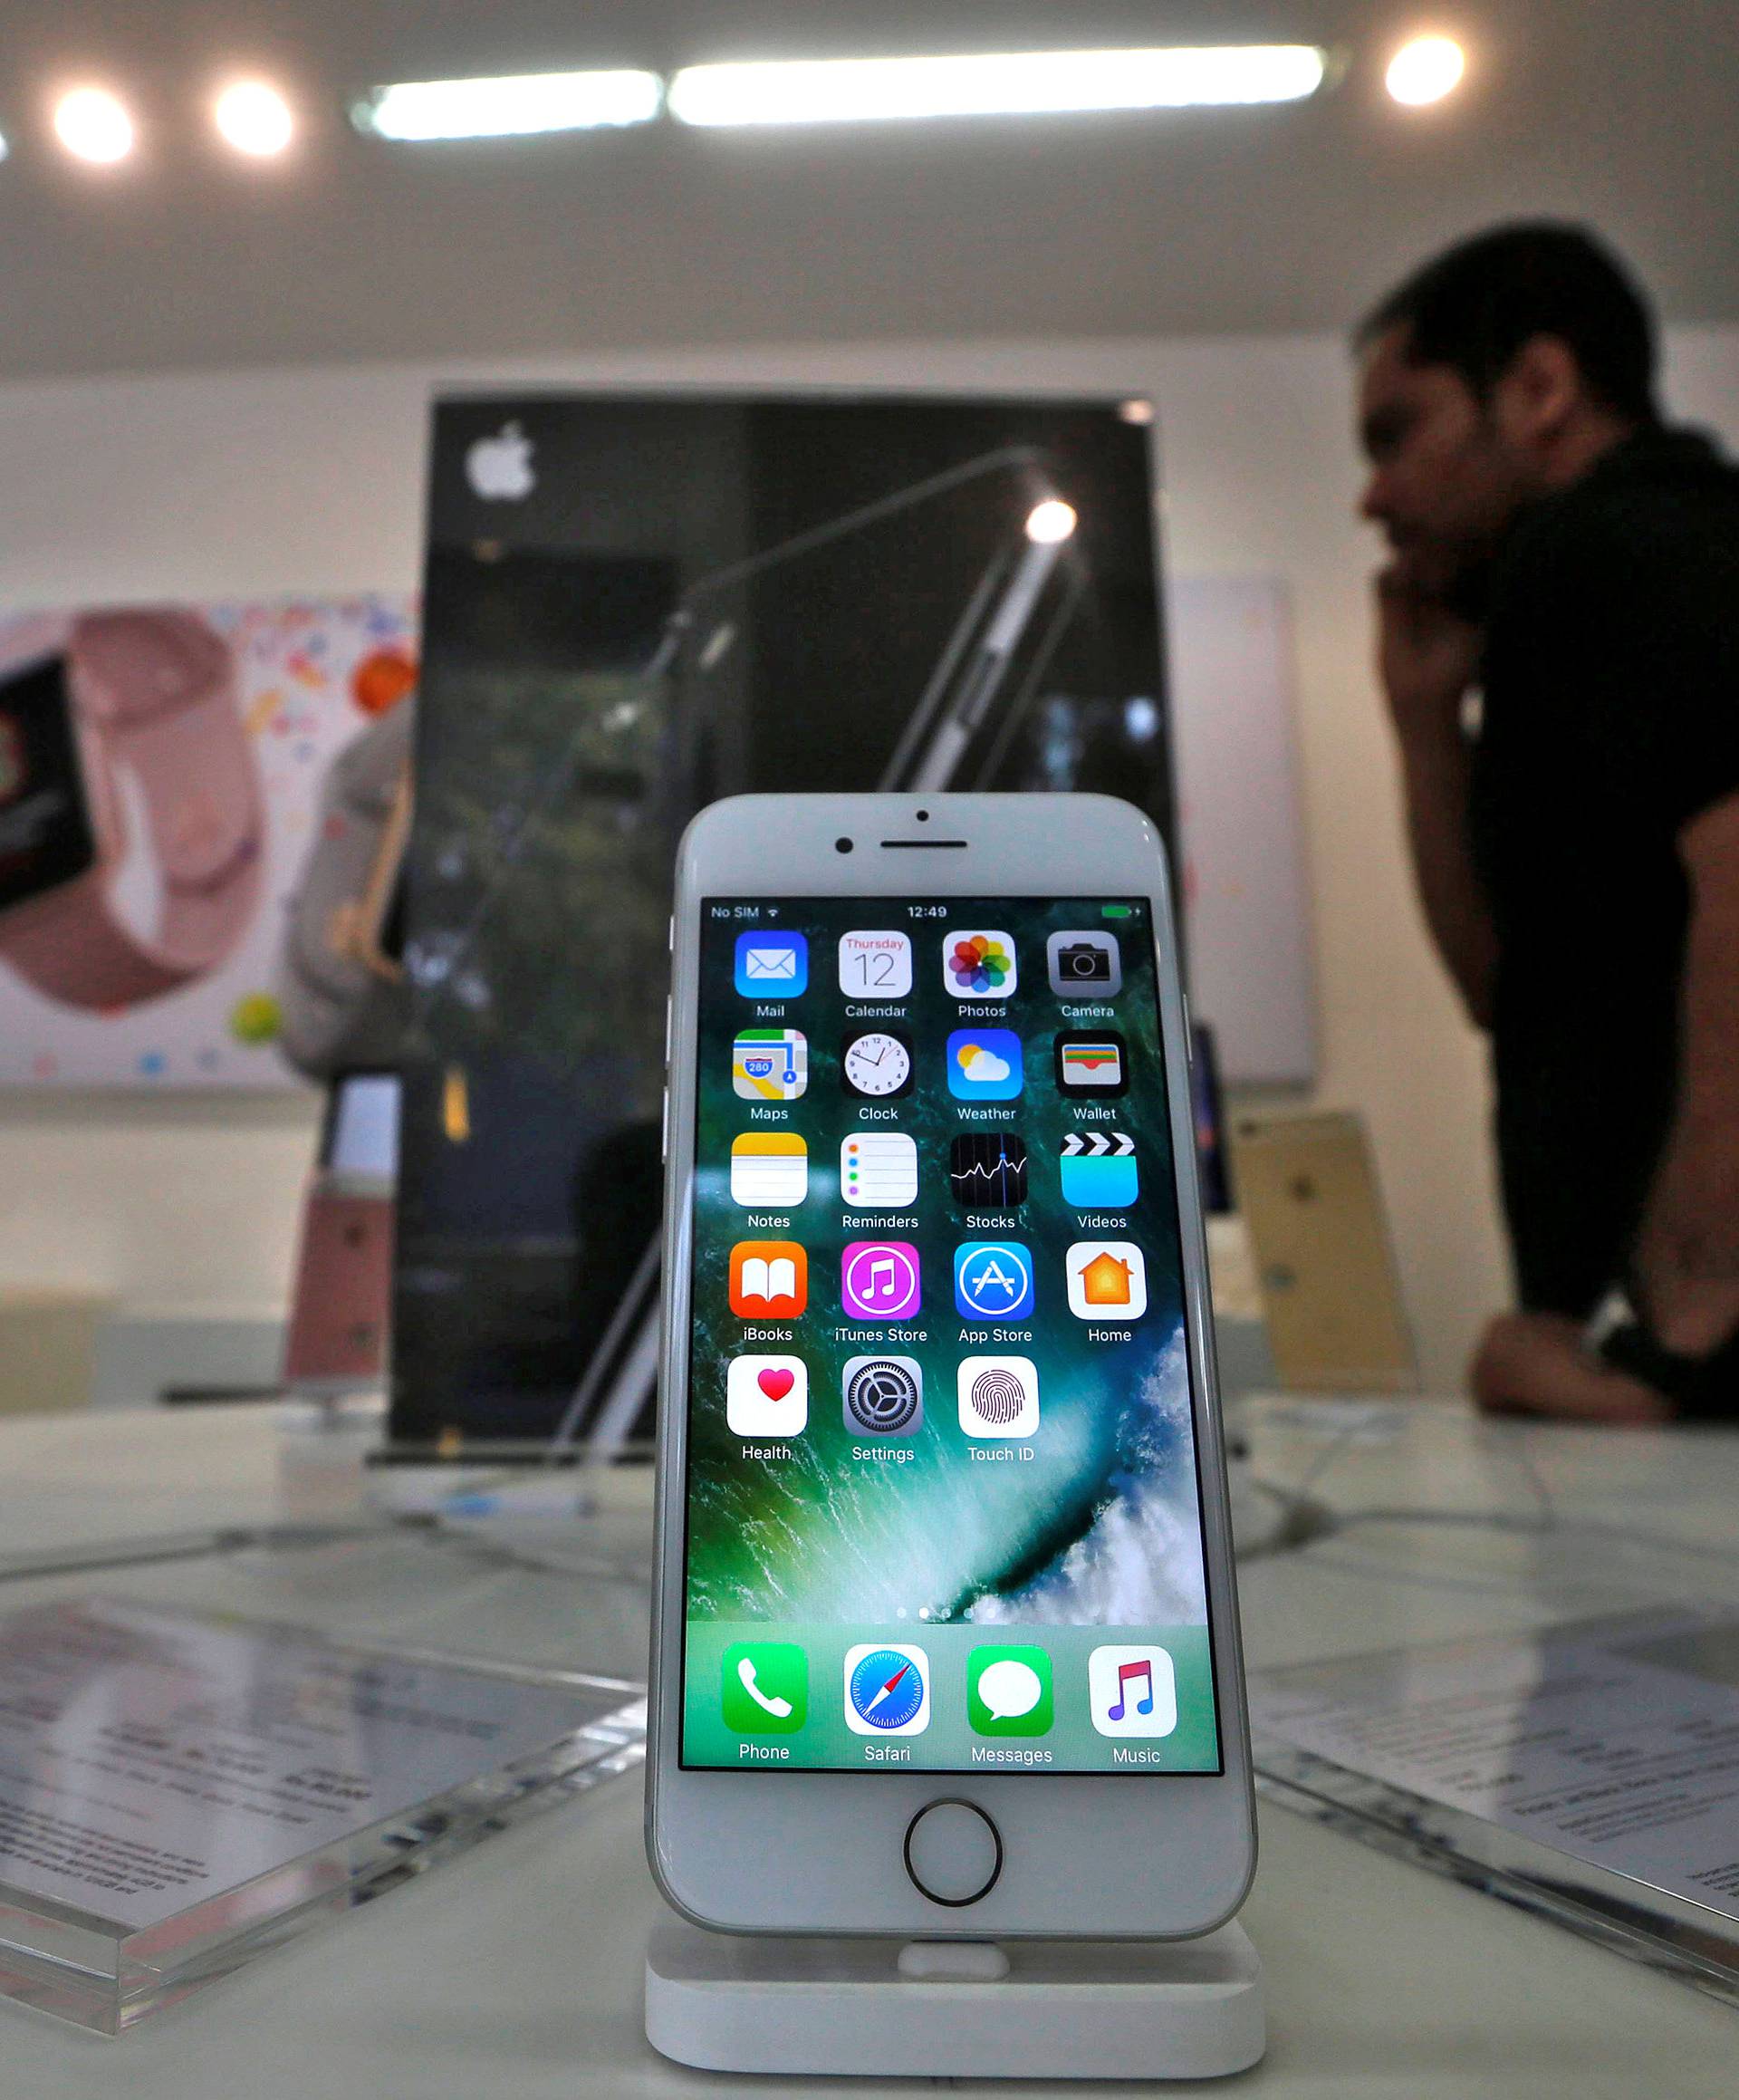 FILE PHOTO: An iPhone is seen on display at a kiosk at an Apple reseller store in Mumbai